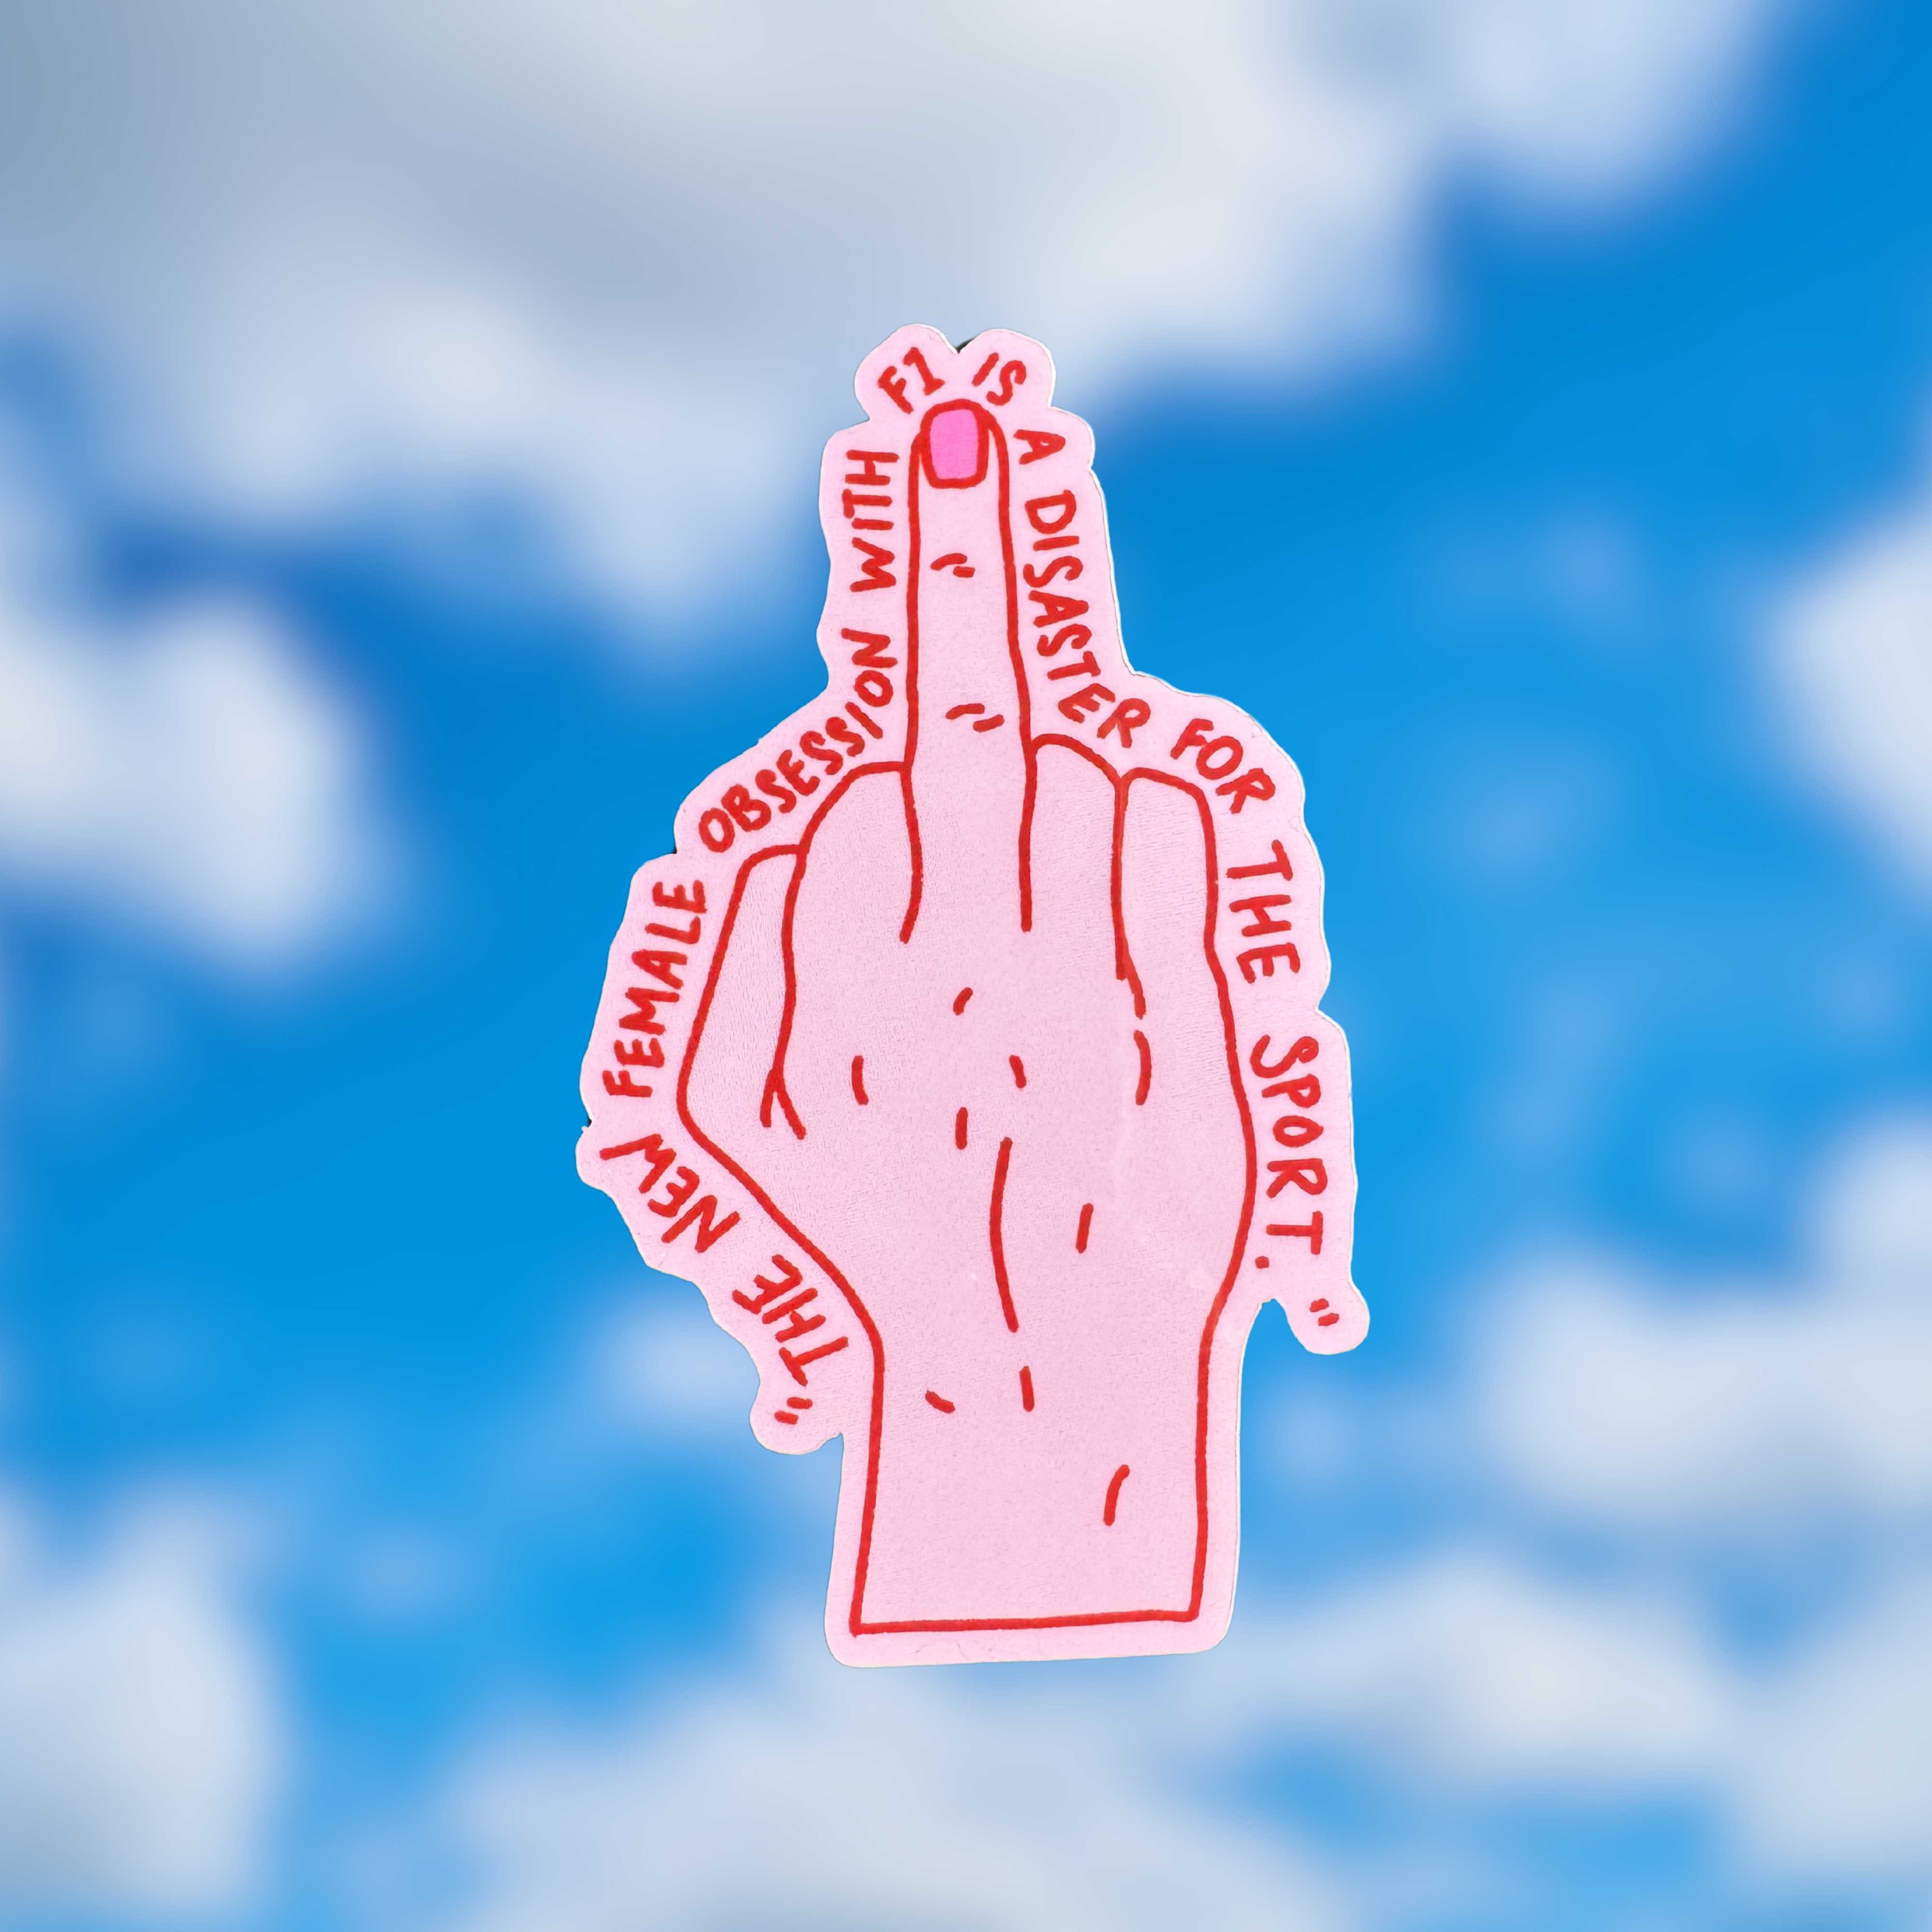 "Obsession" Middle Finger sticker